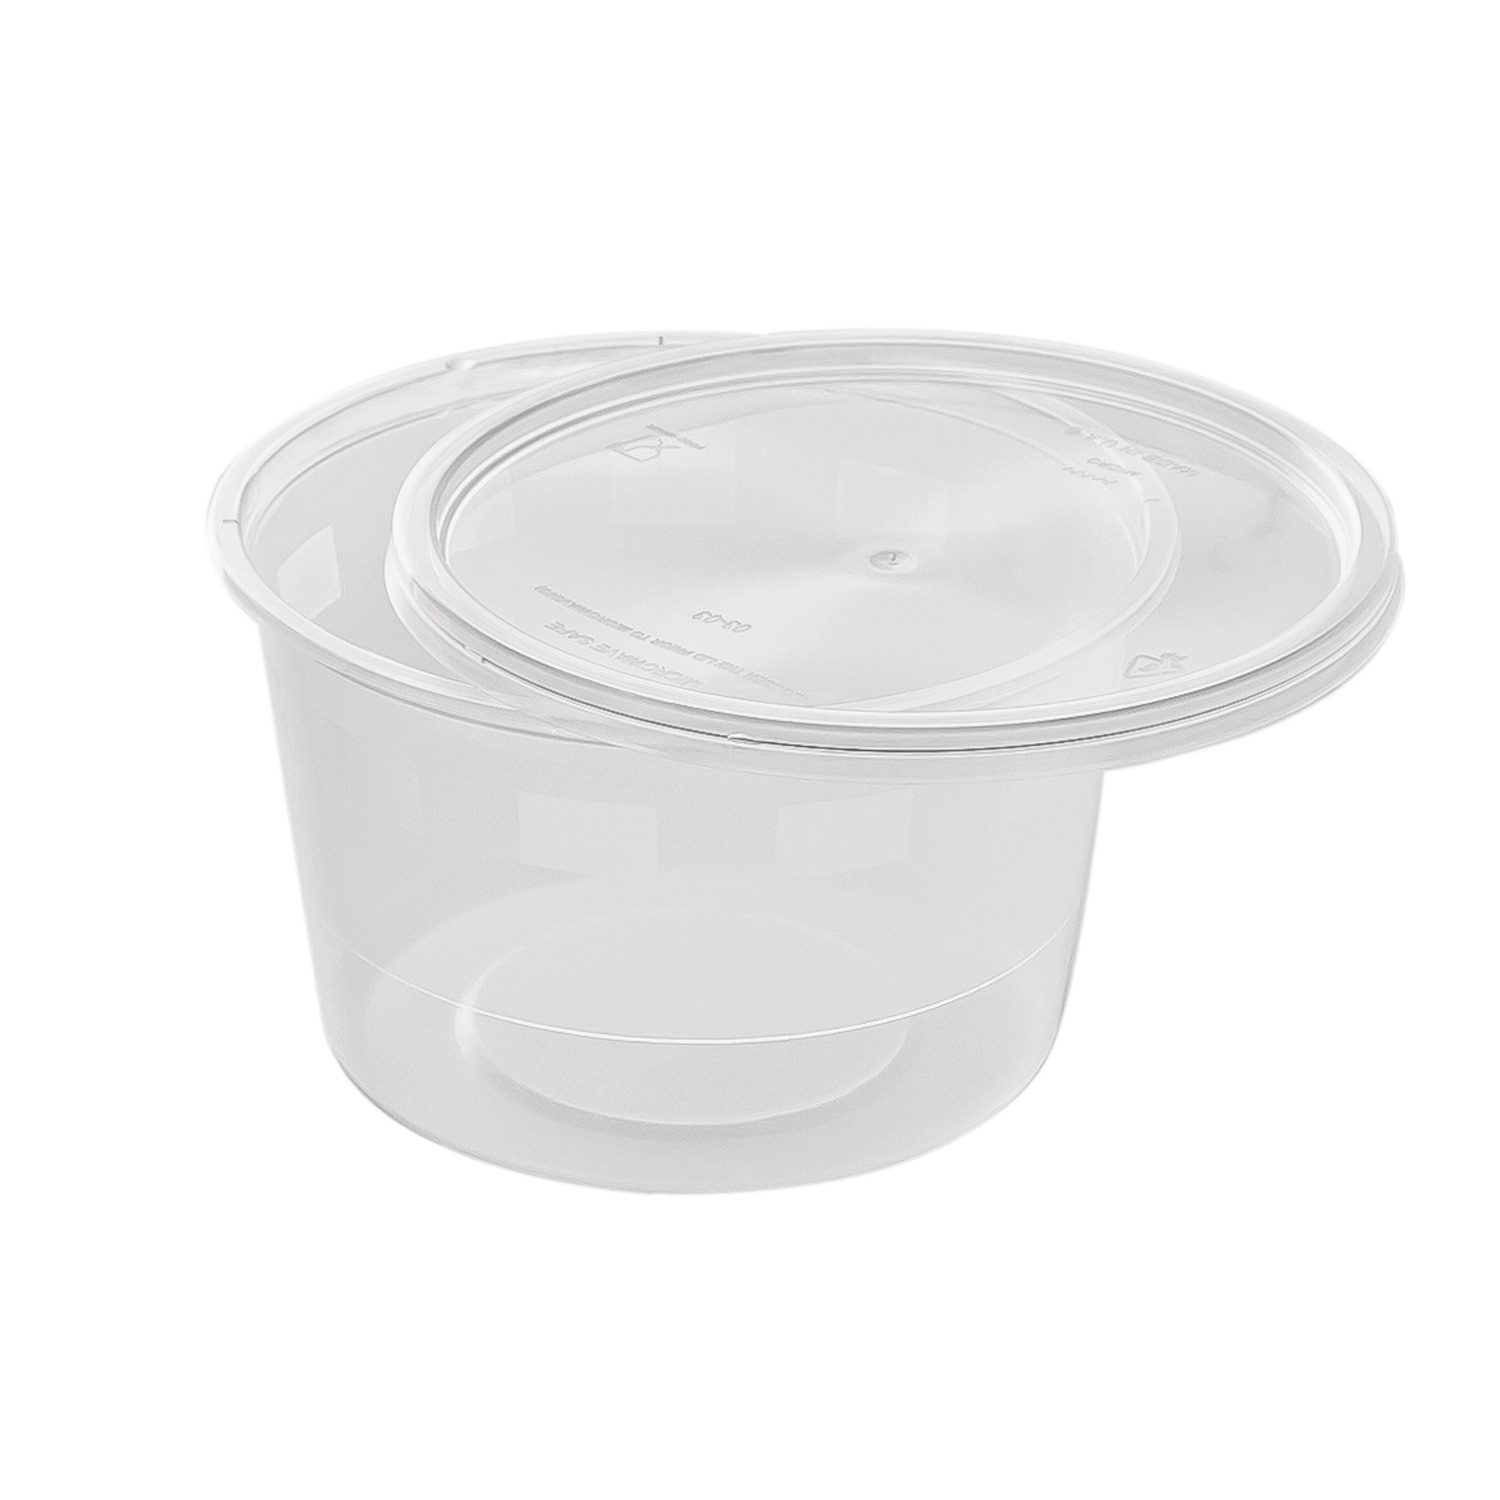 Microwave Container clear (525 cc),  Round Shape